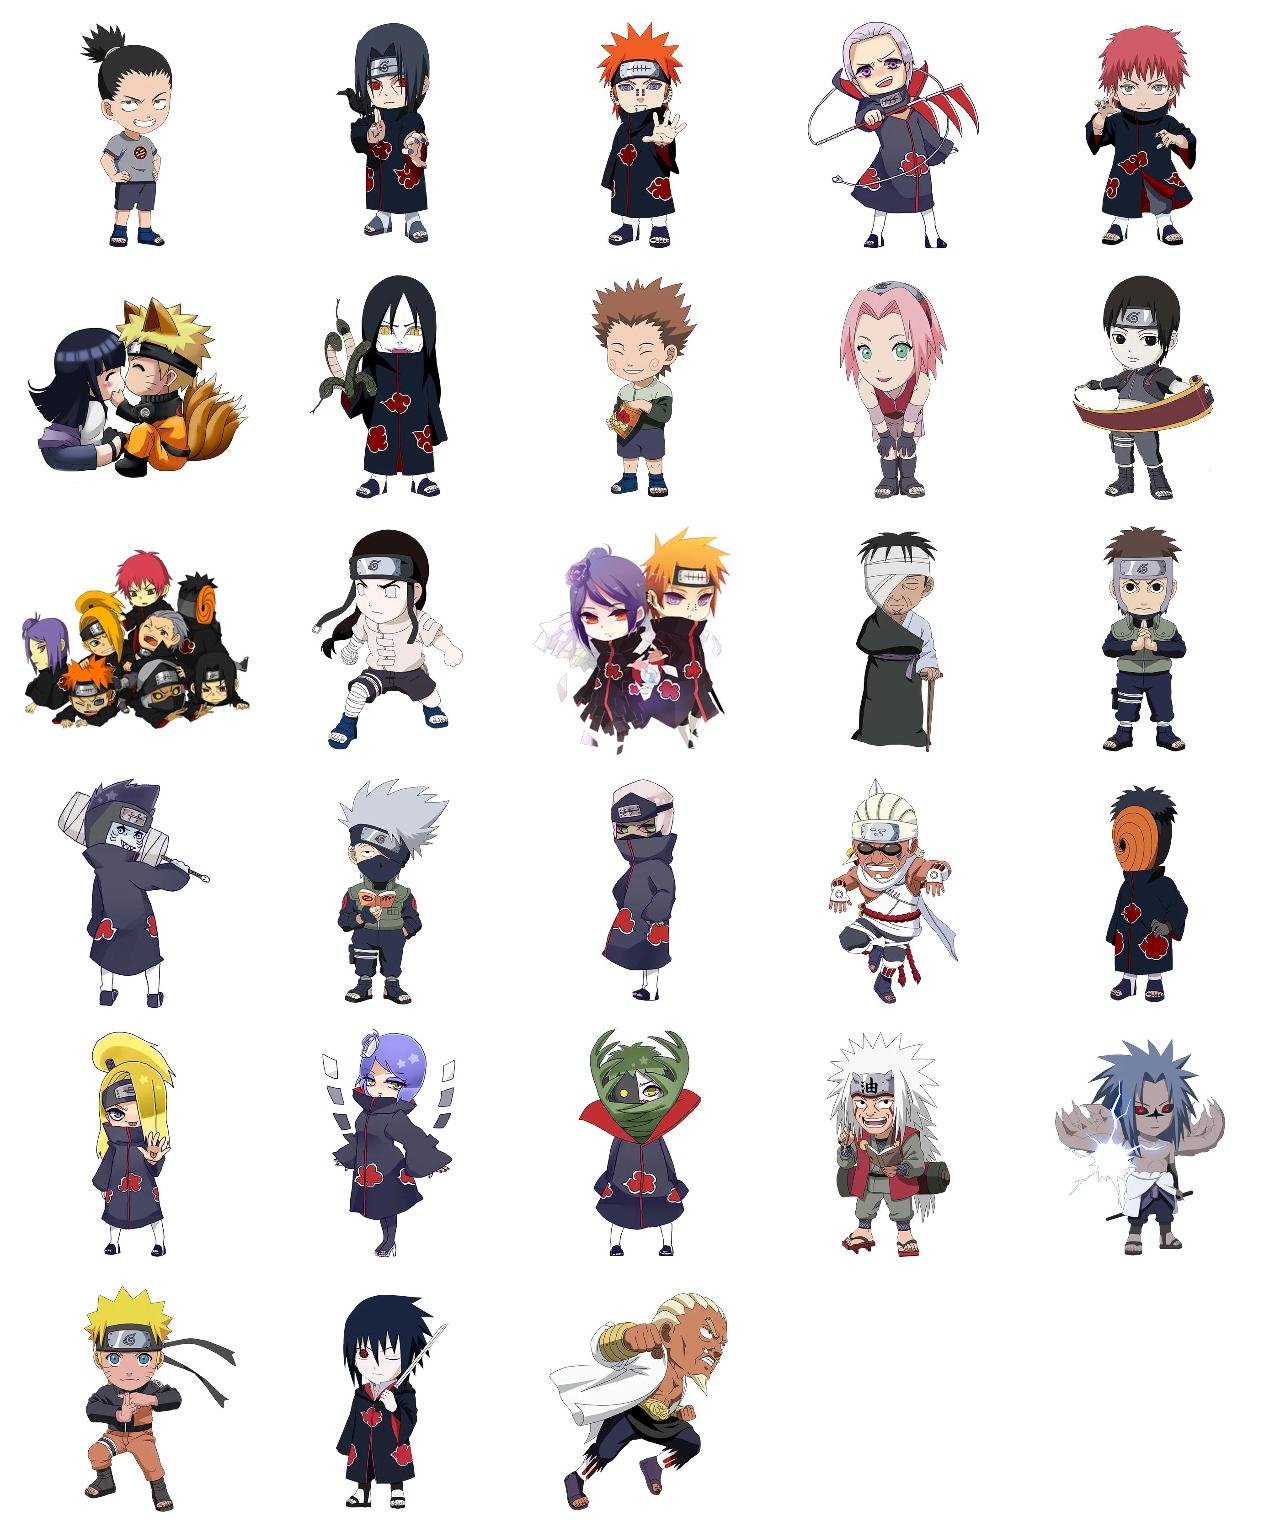 Naruto #3 Naruto, Anime sticker pack for Whatsapp, Telegram, Signal, and others chatting and message apps